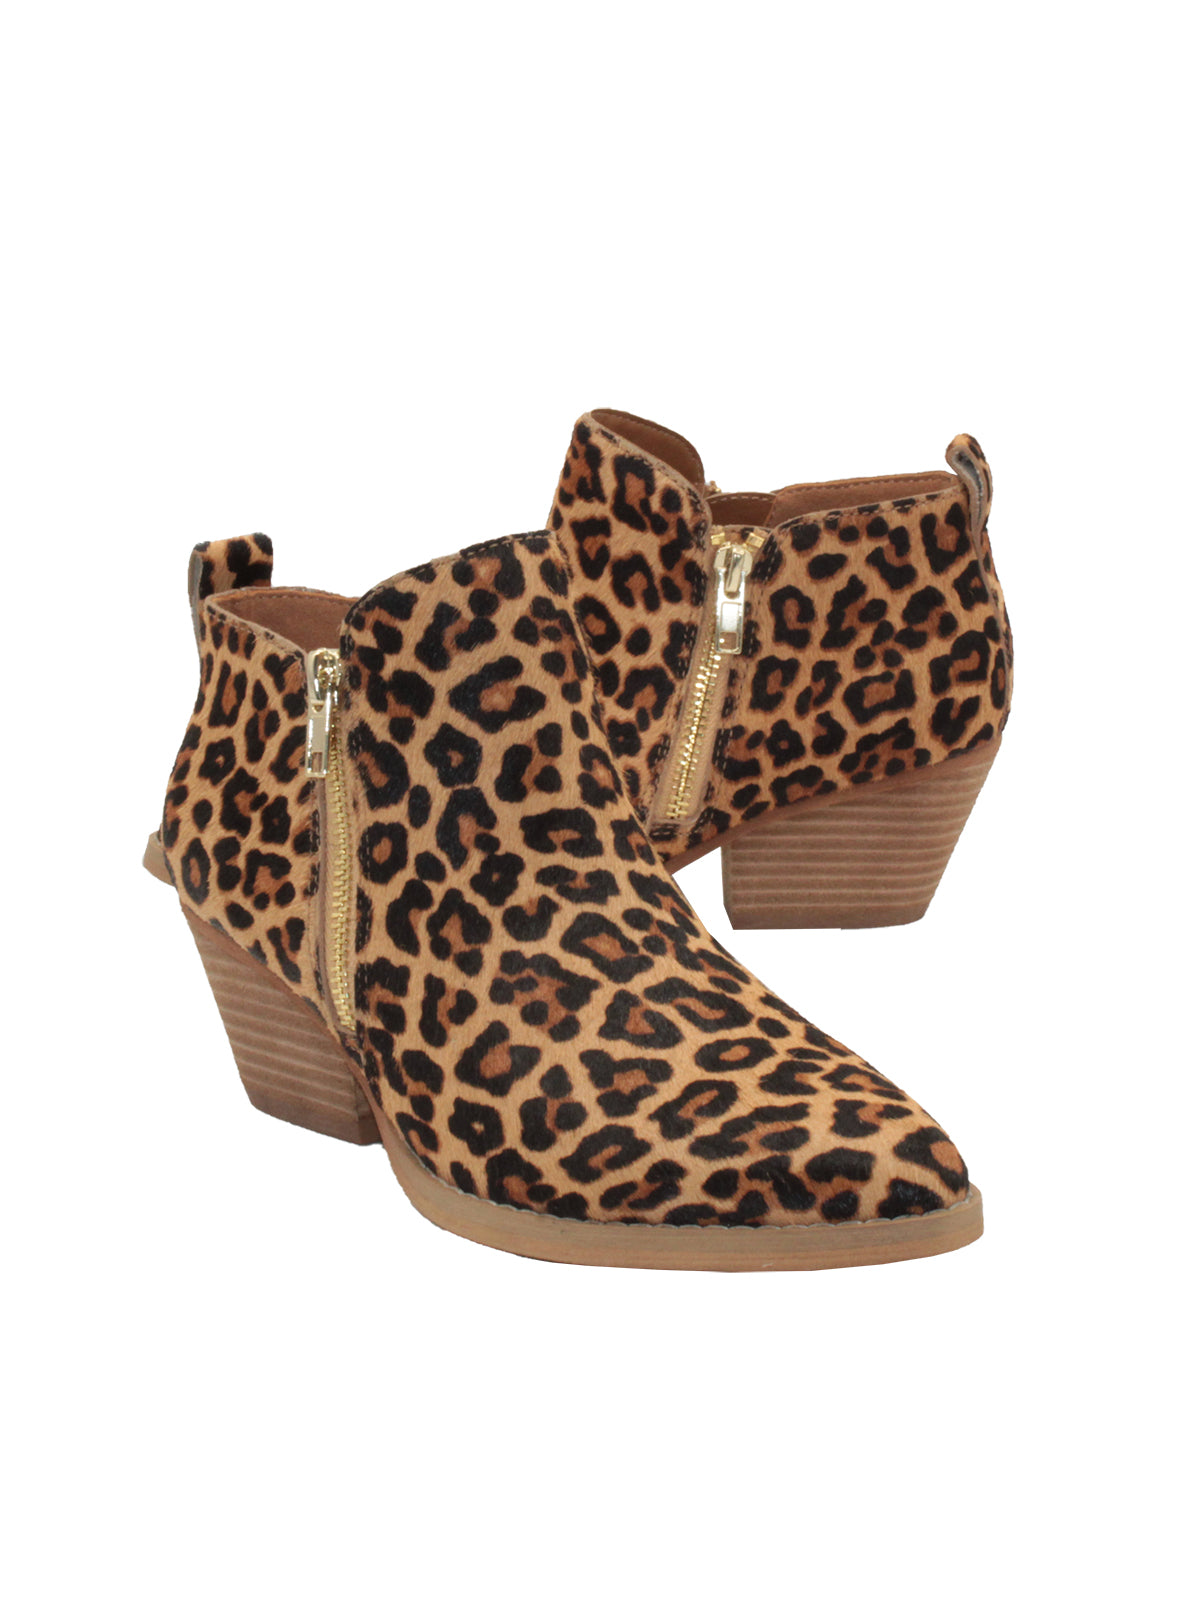 Western inspired Gracemont booties from Very Volatile refresh your wardrobe with on-trend animal print in genuine calf hair. The functioning metal side zippers mean you can slip these on with your favorite pair of jeans and head straight into the weekend.  tan leopard  2